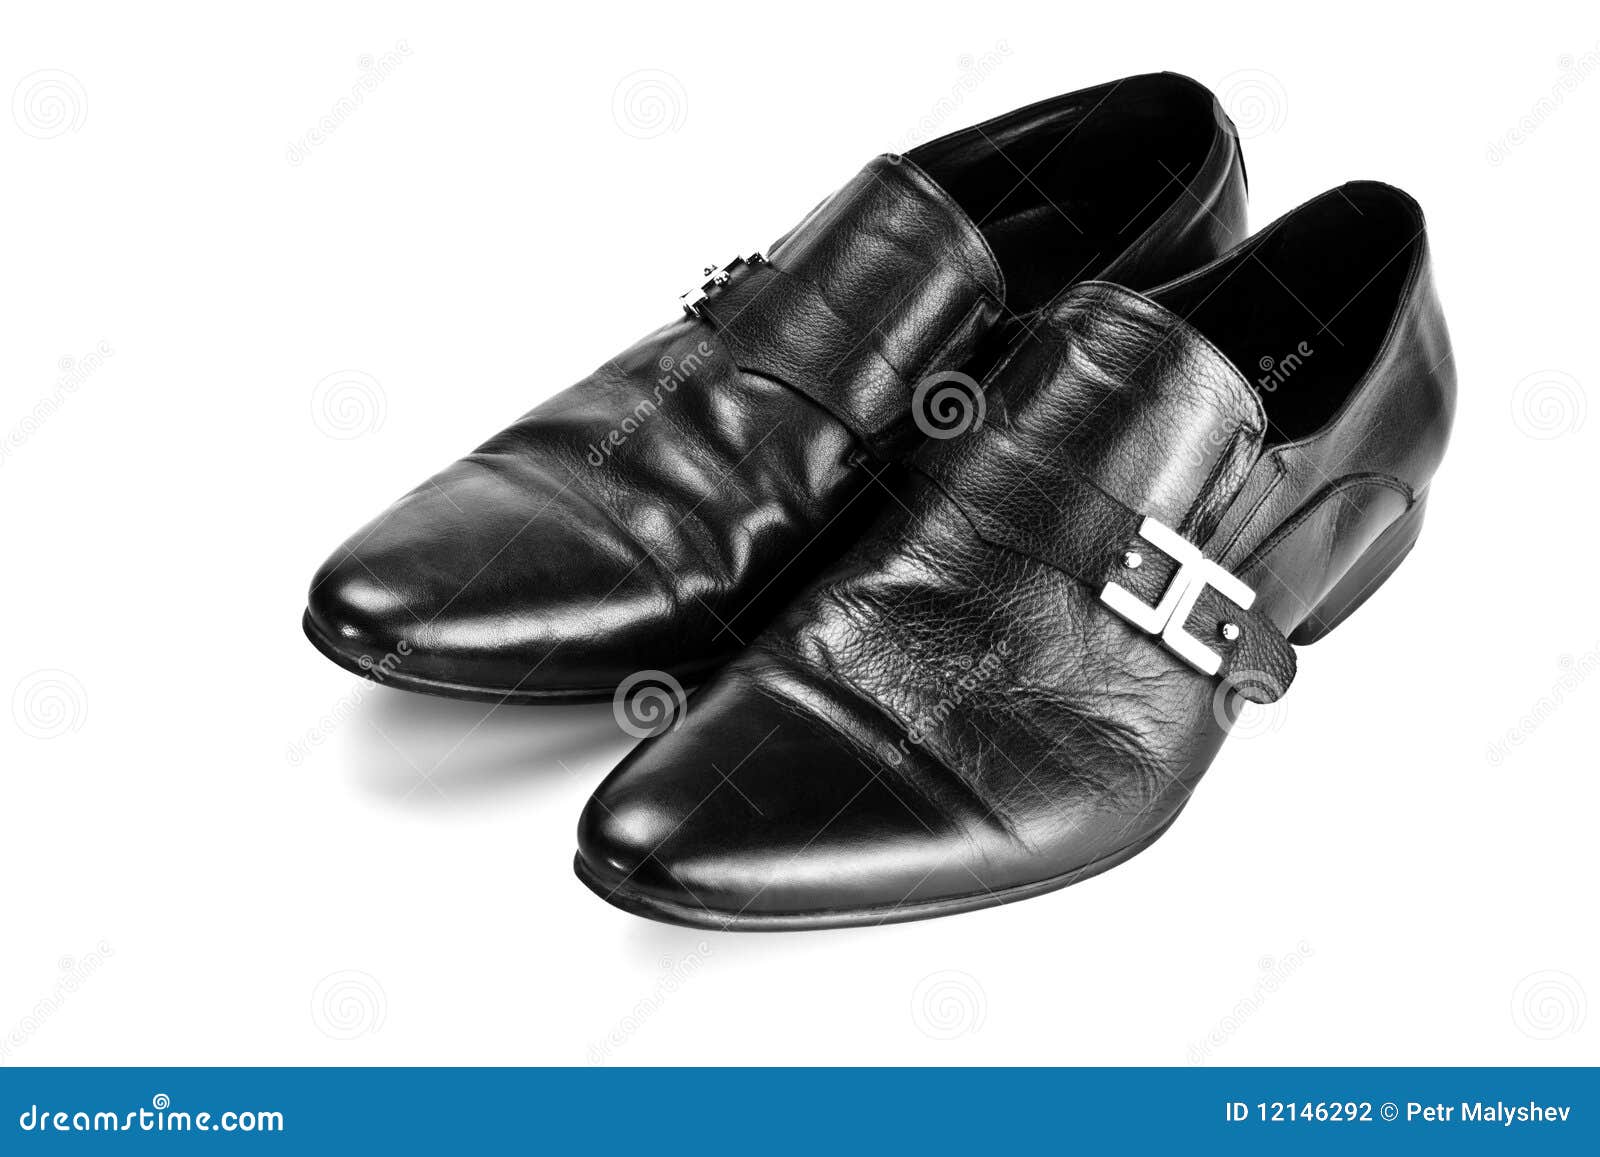 Black Male Shoes with Buckles Stock Photo - Image of hike, assortment ...